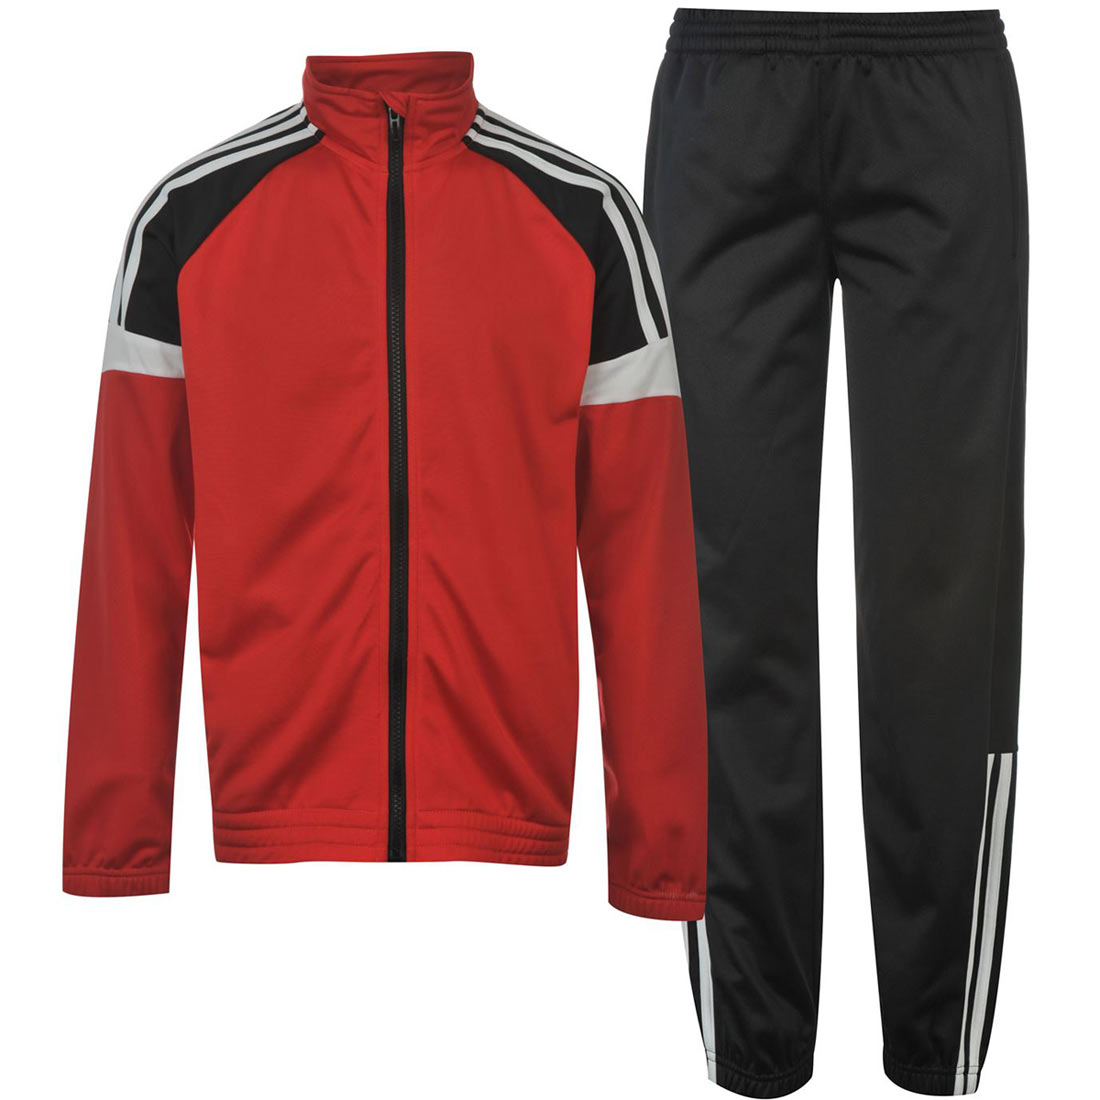 Track Suit – Intention Sports